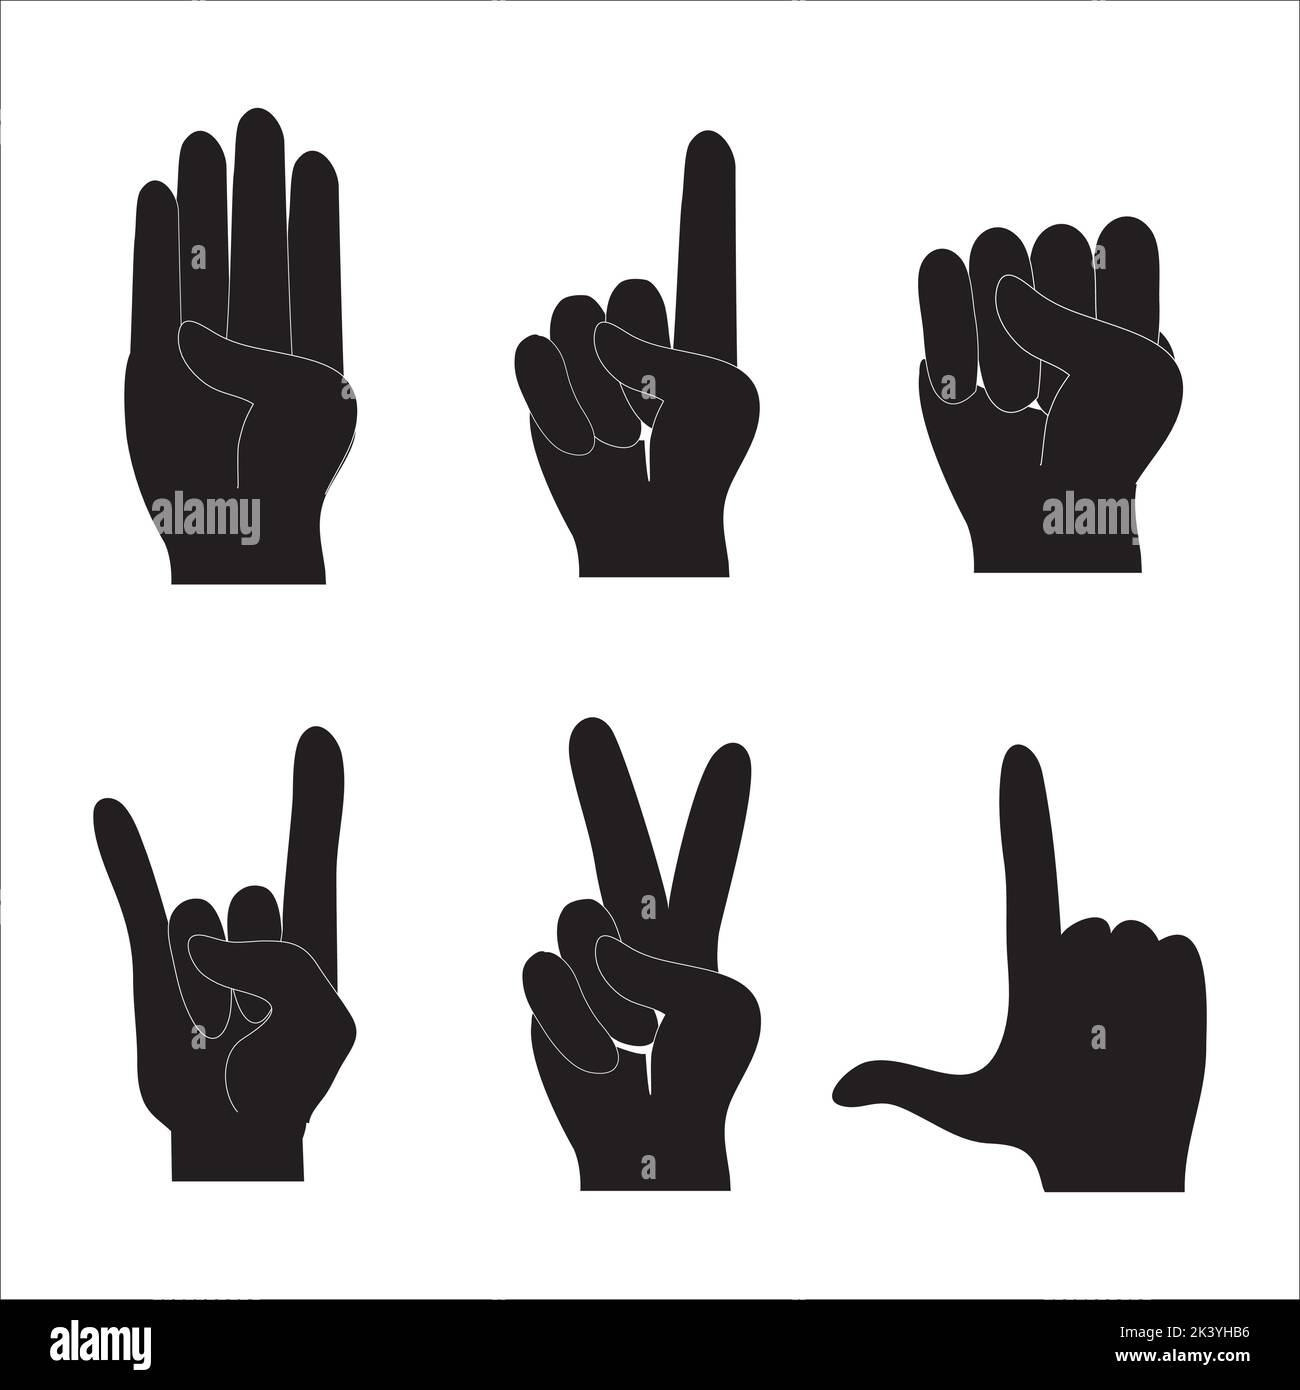 Vector Set Of Human hand Gestures Silhouettes Illustration Isolated On White Background Stock Vector